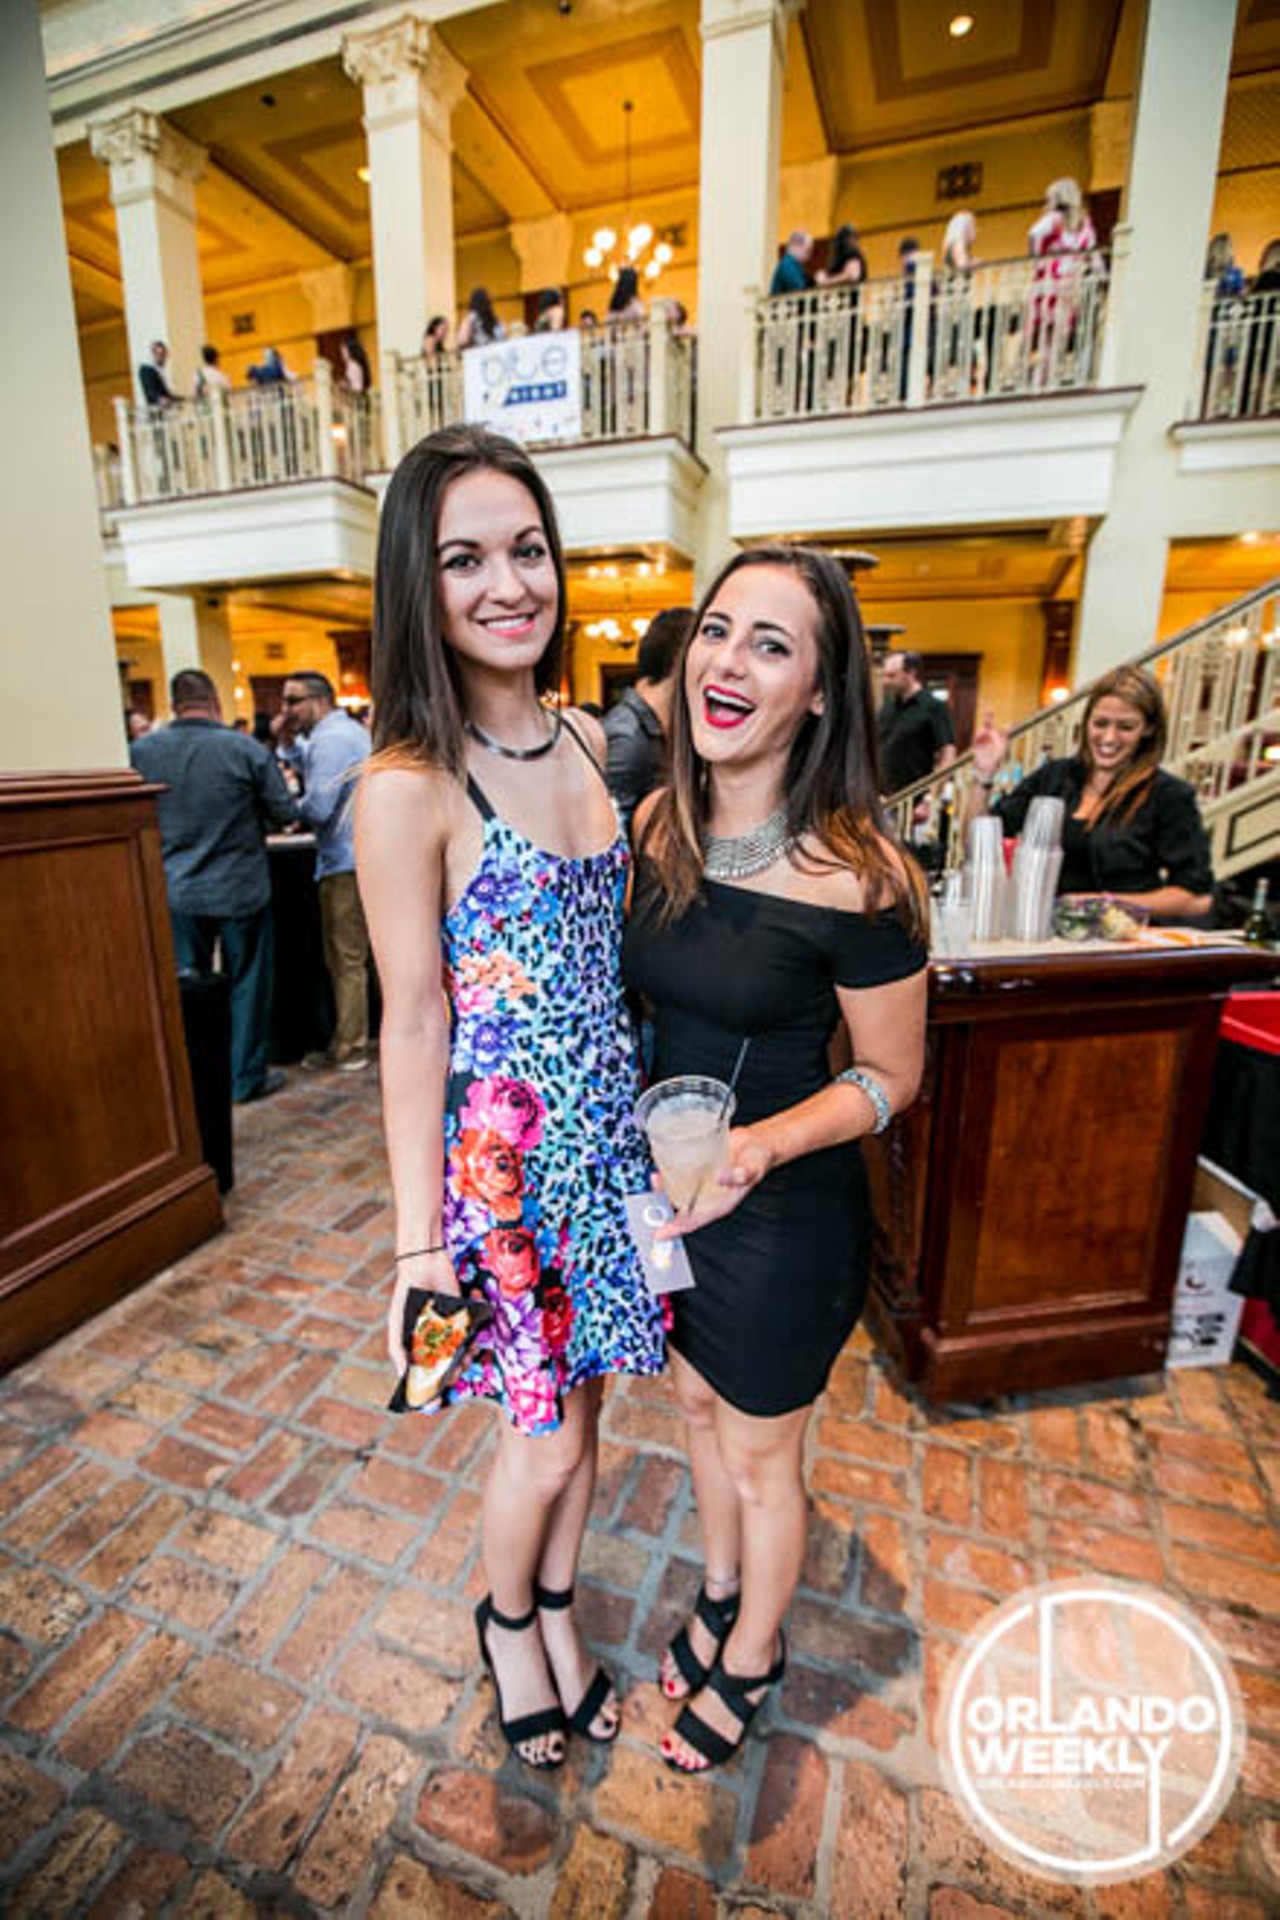 Food, Drinks & Smiles: The Spectacular Event that was Bite Night 2015